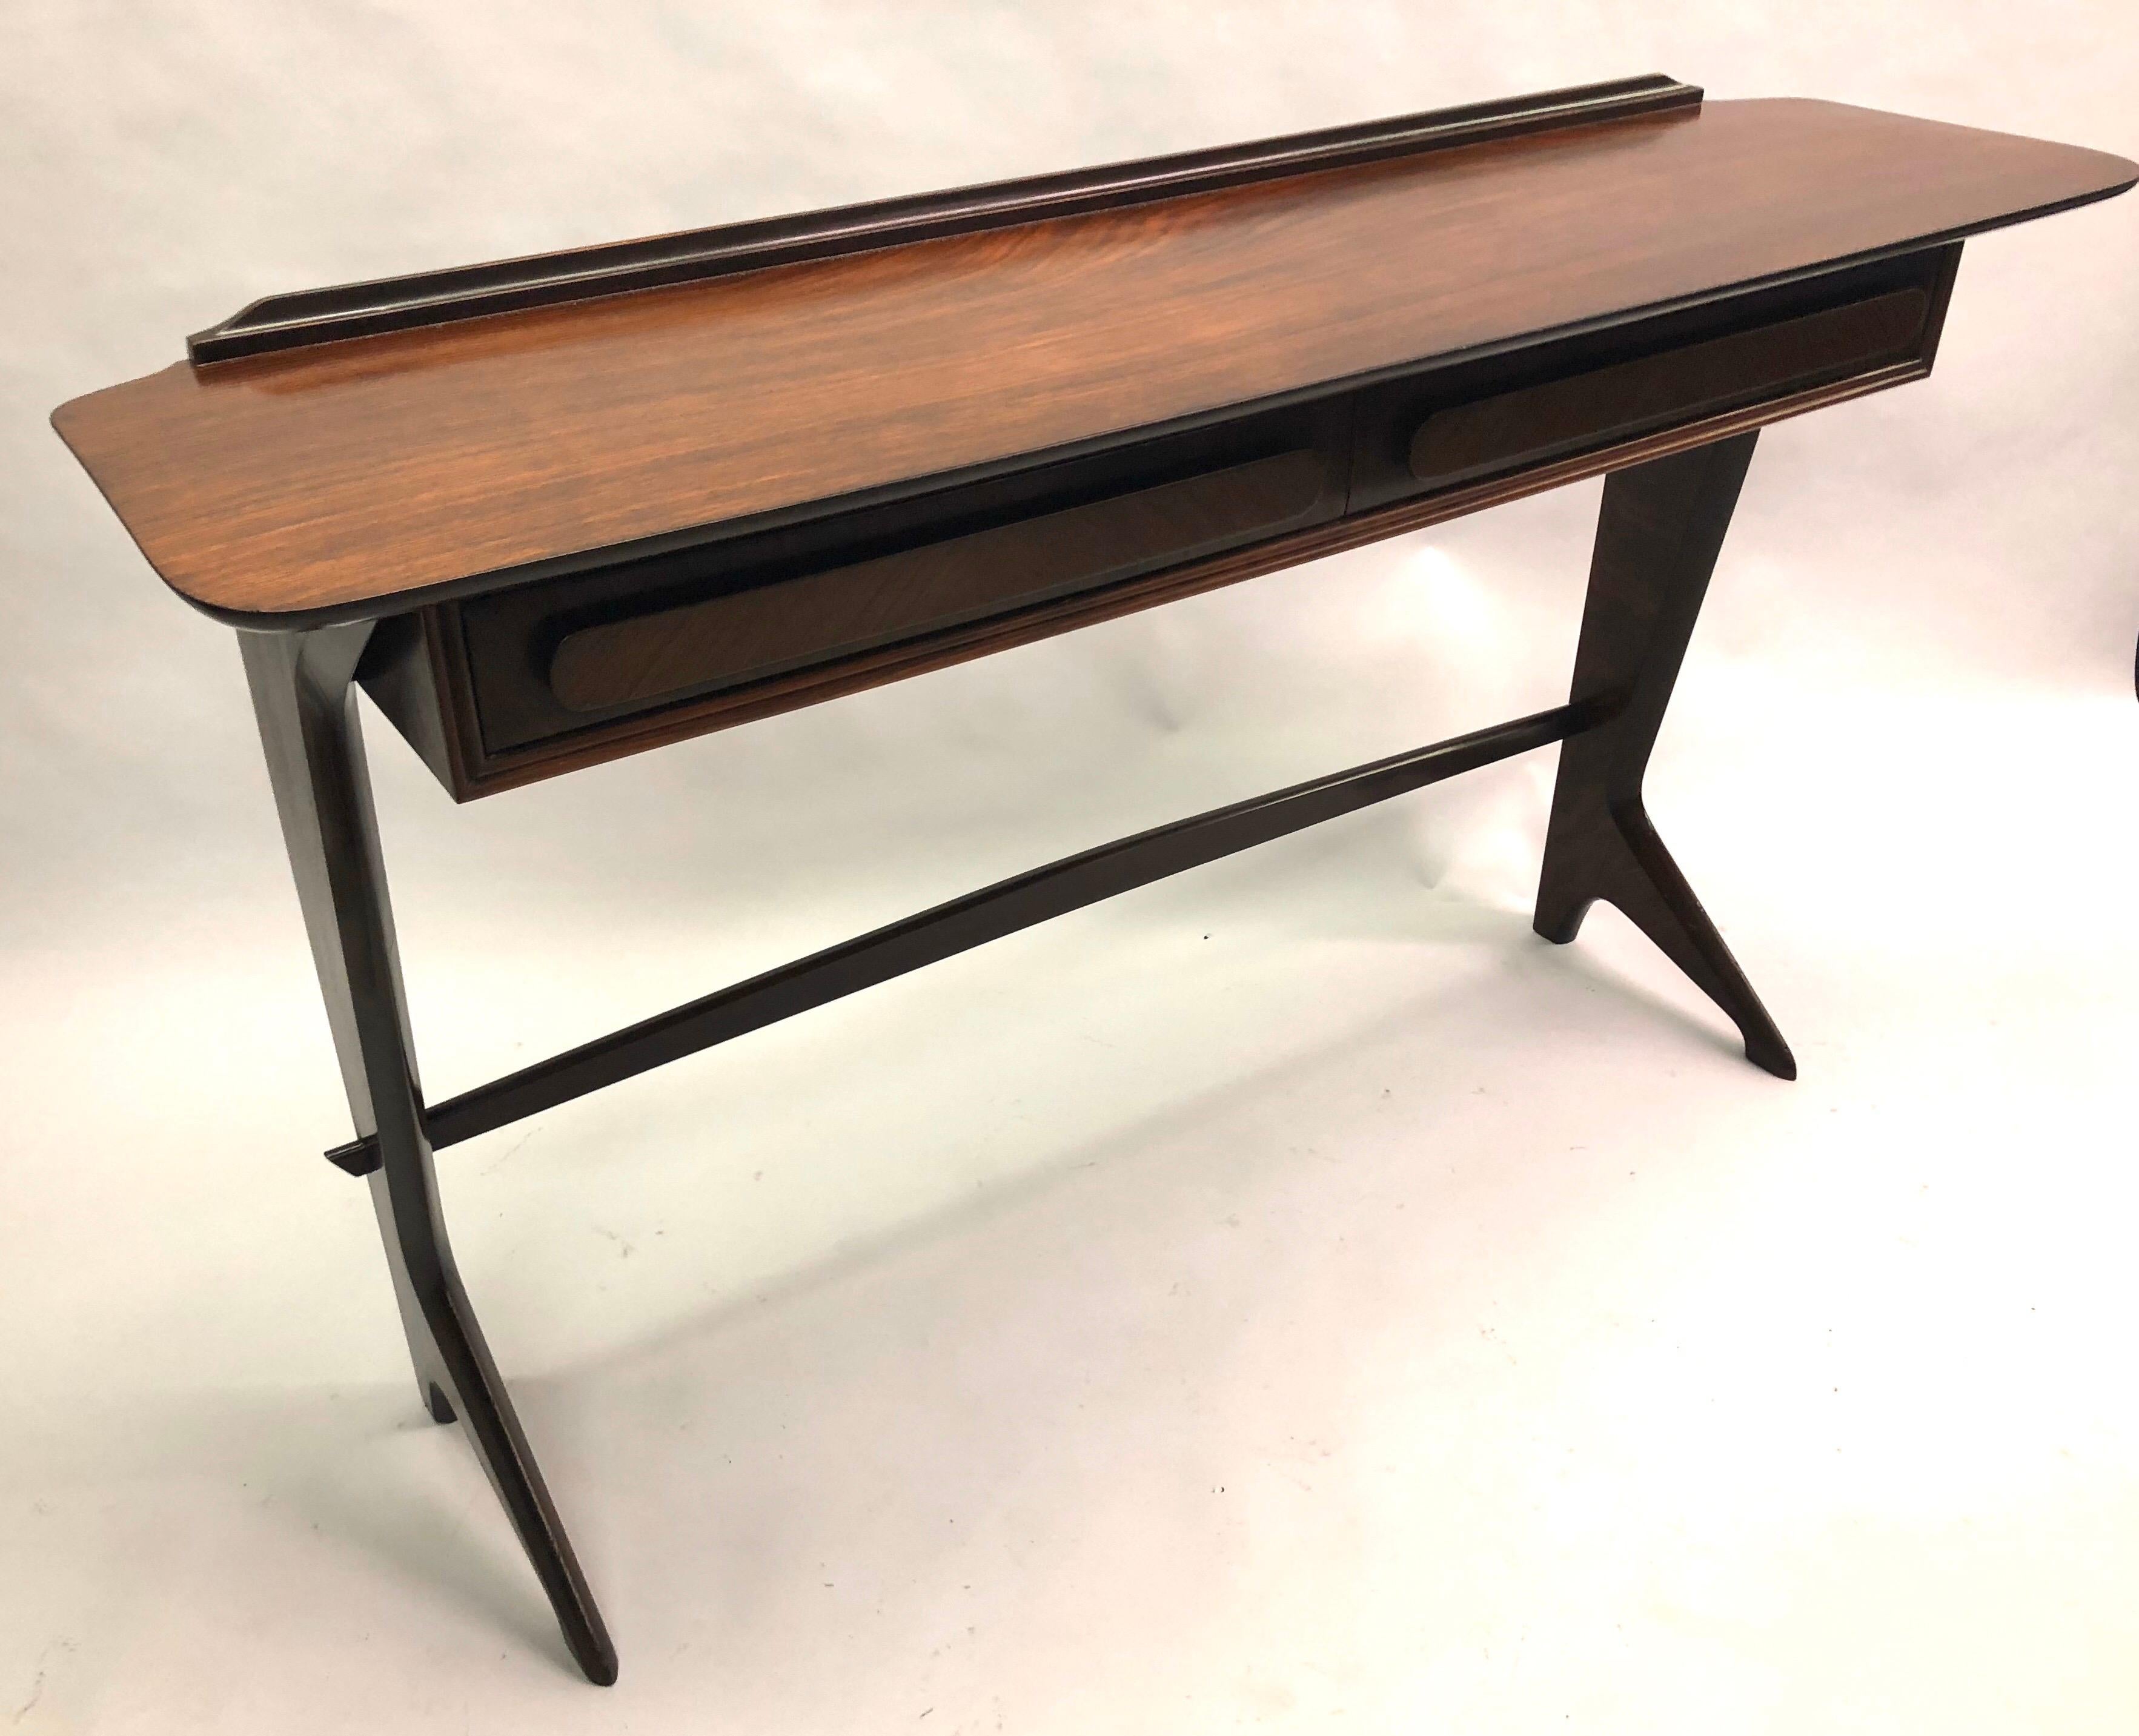 20th Century Rare and Important Italian Mid-Century Modern Rosewood Console by Ico Parisi